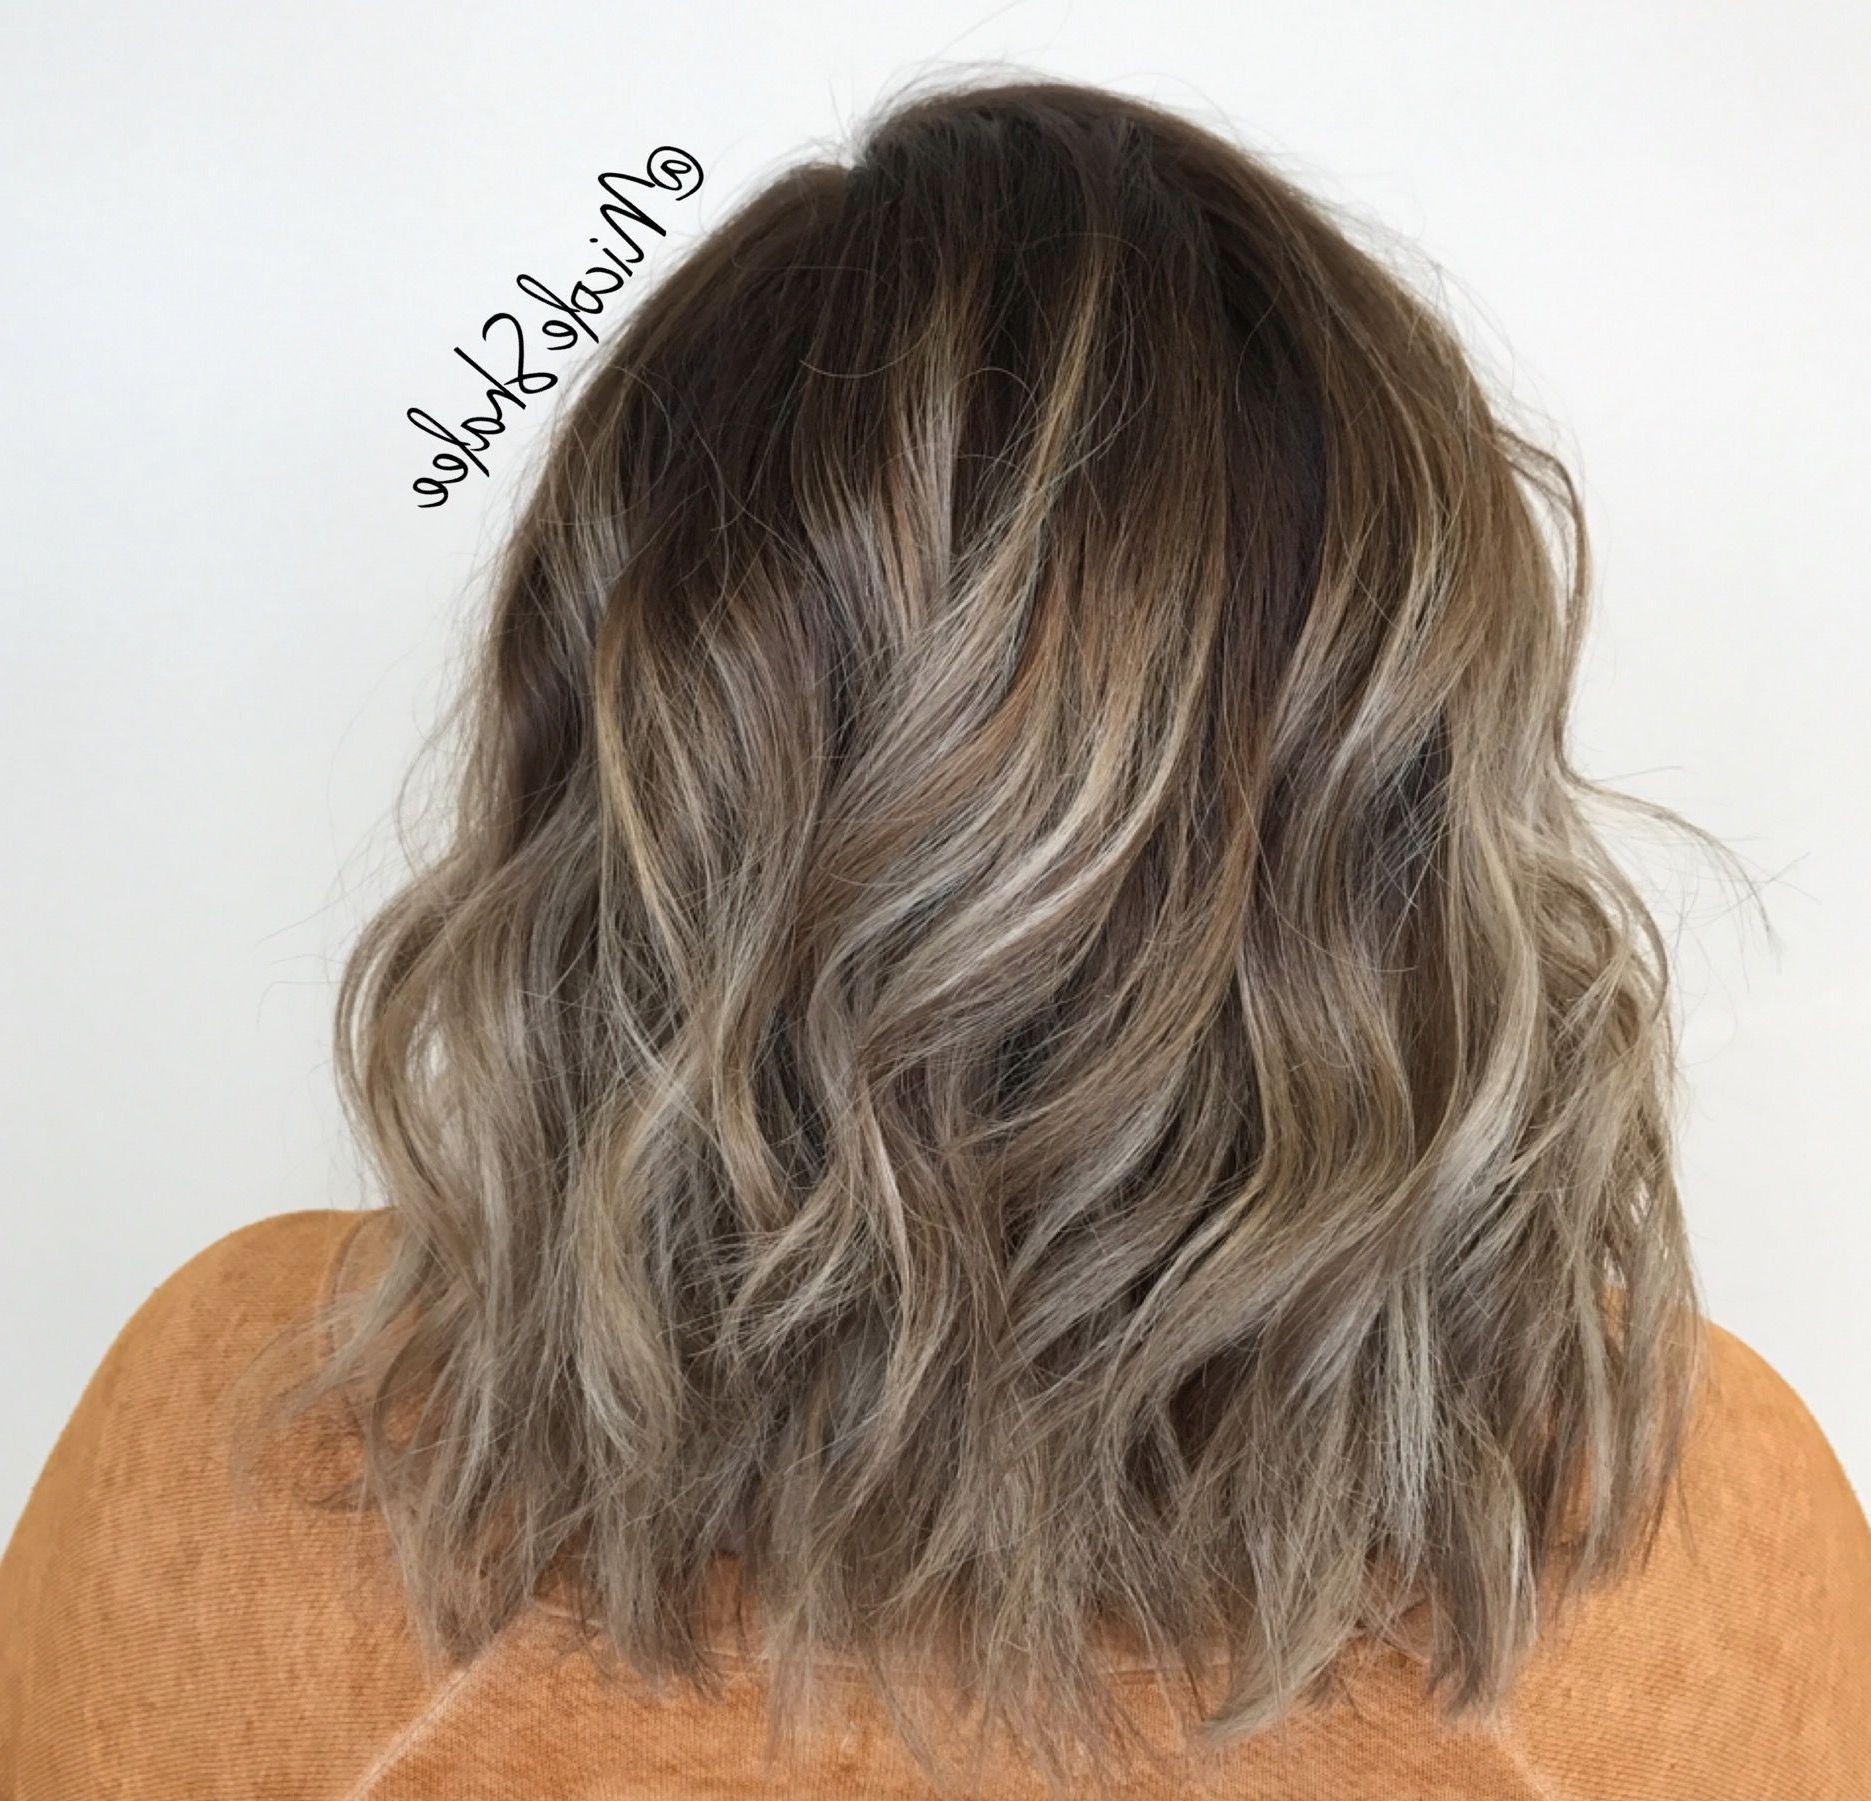 Widely Used Rooty Long Bob Blonde Hairstyles In Shadow Root, Smudge Root, Balayage, Warm Highlights, Long Bob, Lob (View 6 of 20)